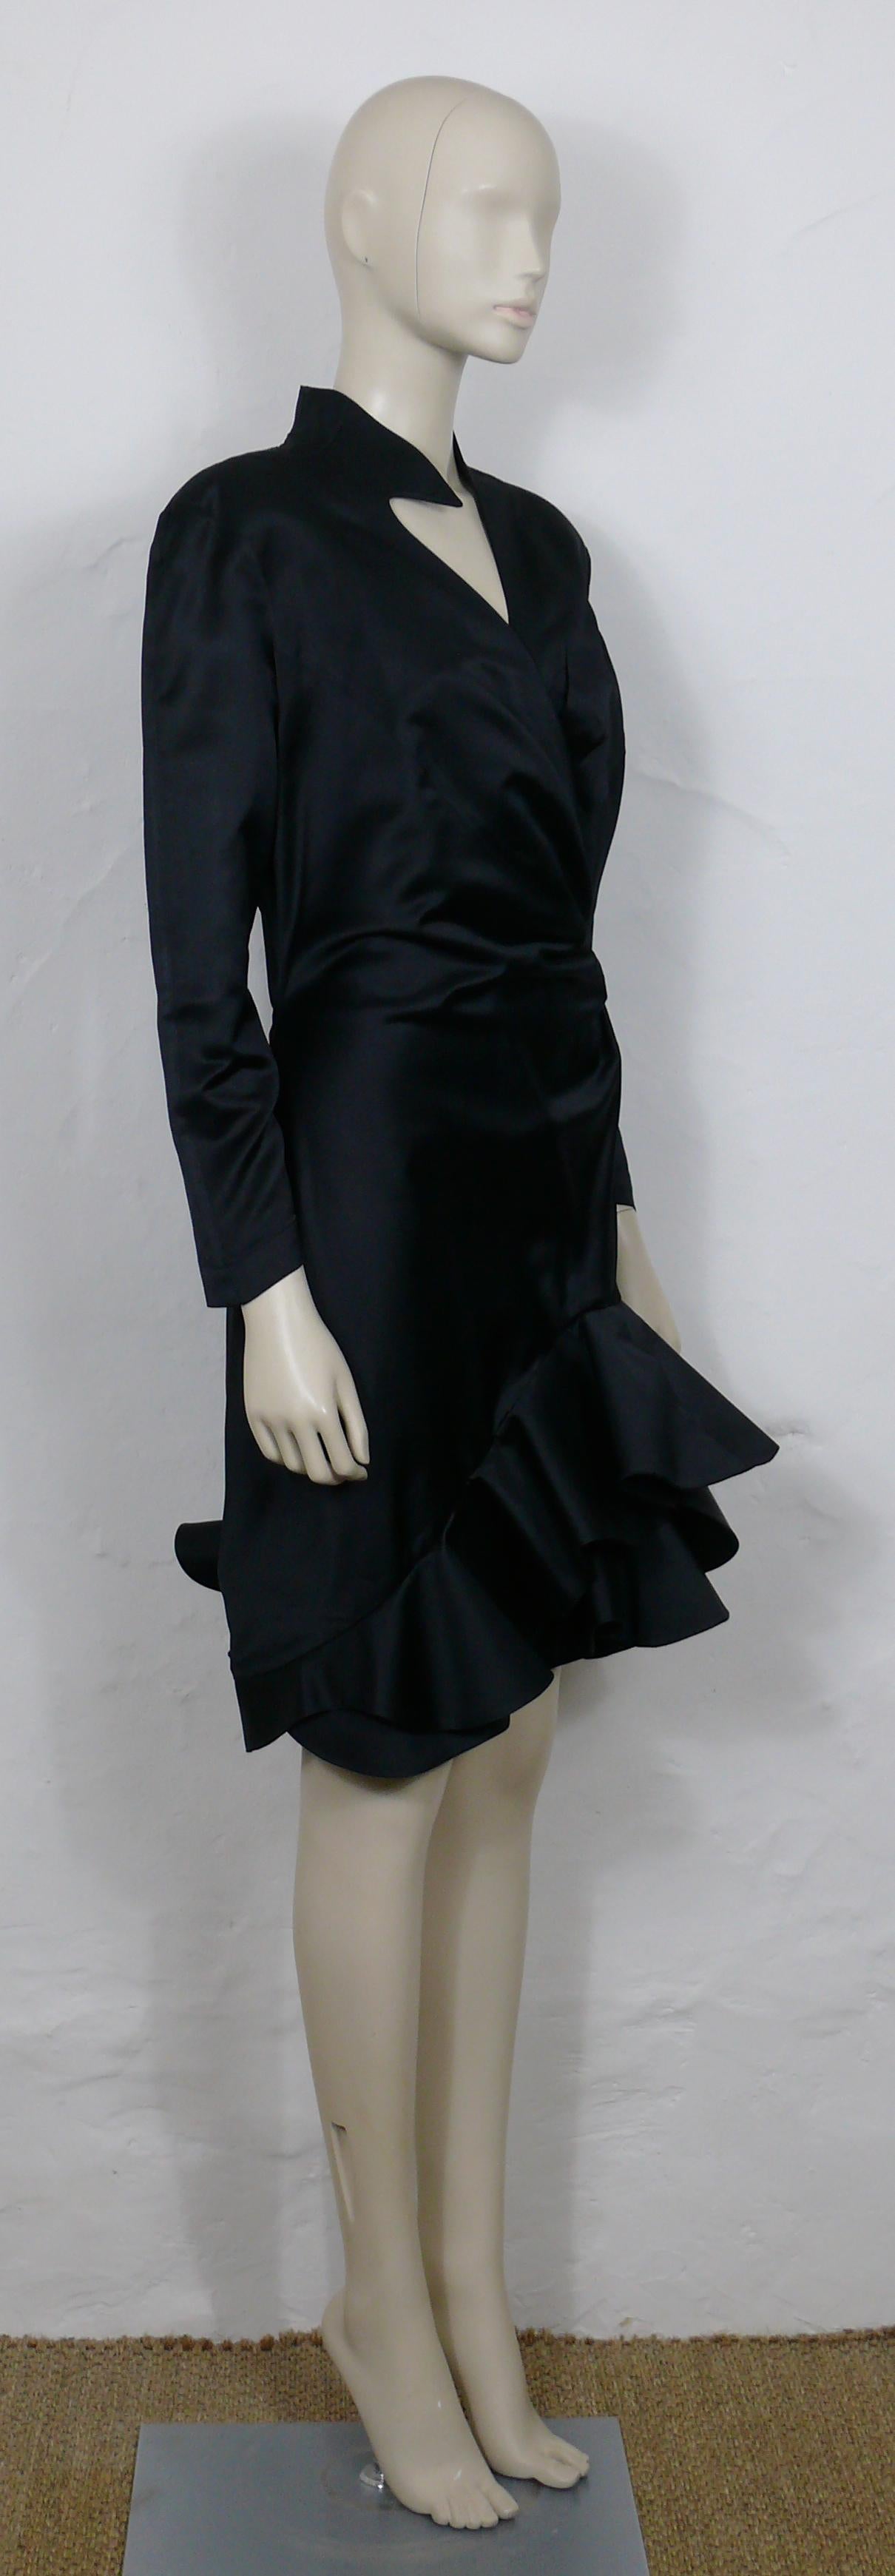 THIERRY MUGLER vintage black asymetric bias cut ruffled cocktail dress featuring MANFRED THIERRY MUGLER's typical sculptural cut, sensuality and aesthetic.

This dress features :
- Abstract asymetric collar.
- Bias cut at the hem featuring